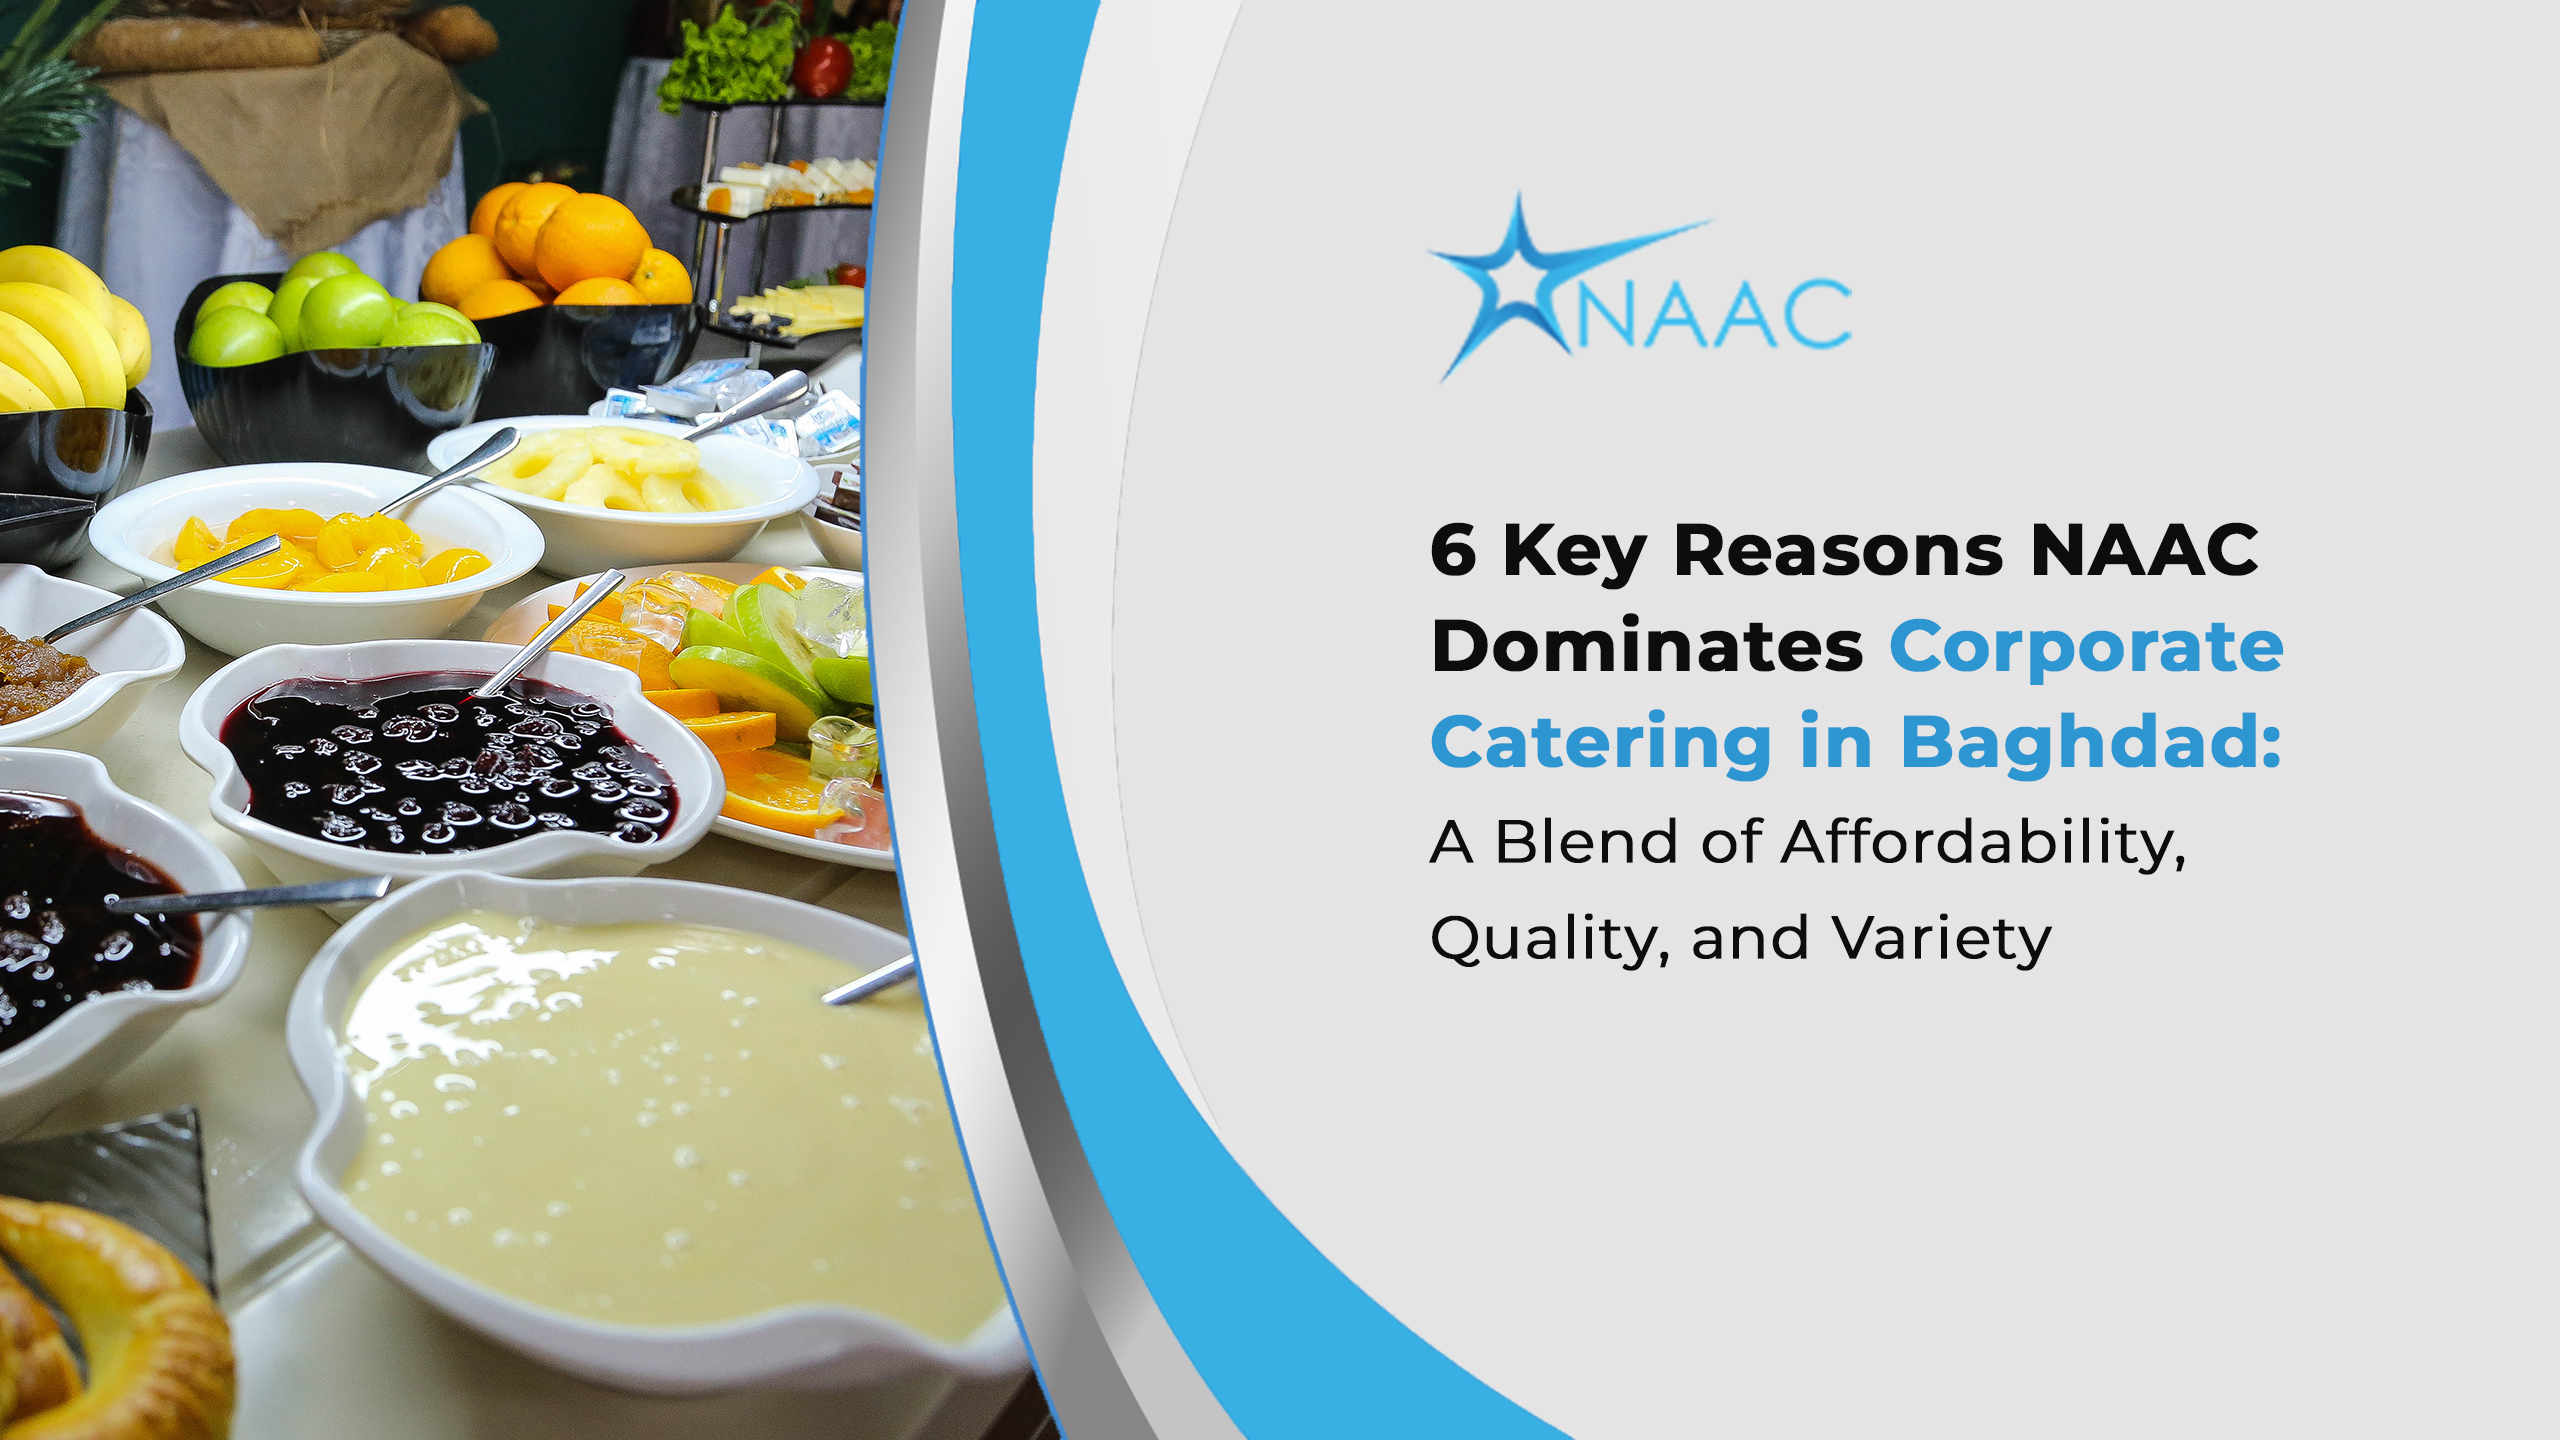 6 Key Reasons NAAC Dominates Corporate Catering in Baghdad: A Blend of Affordability, Quality, and Variety